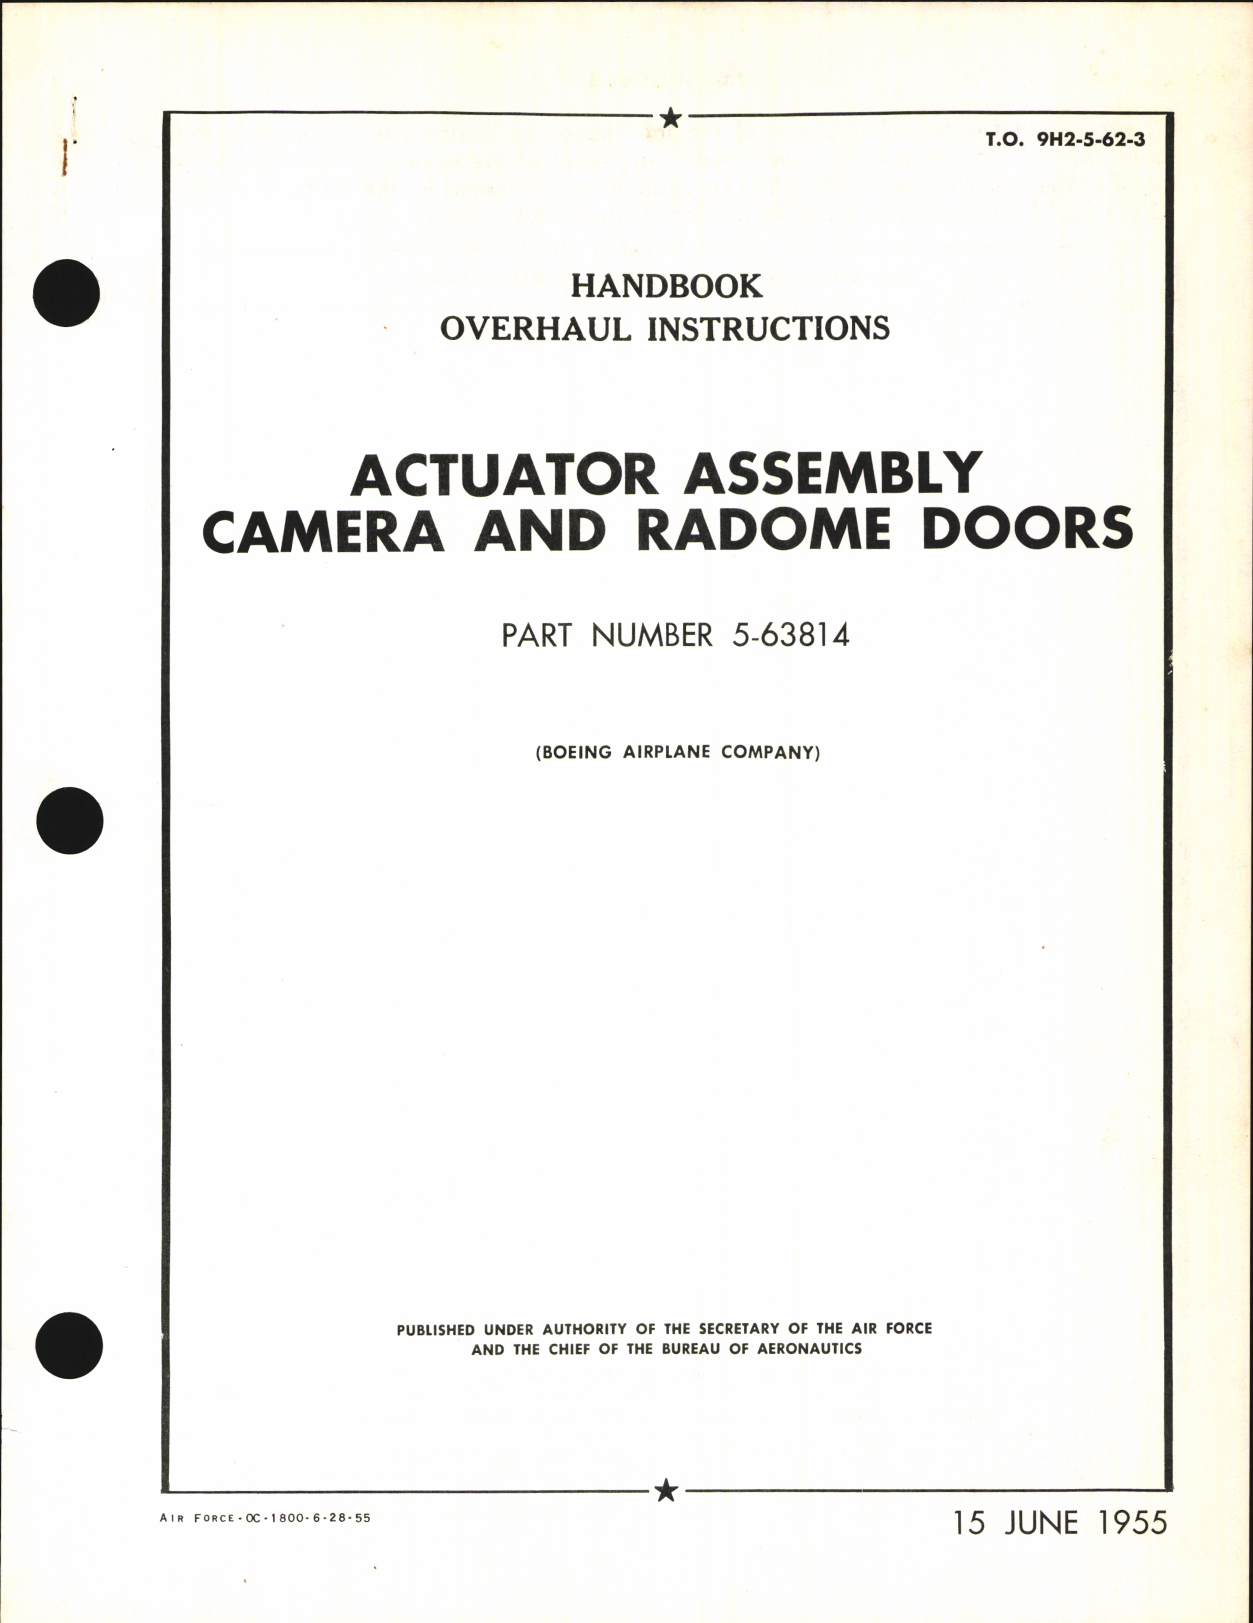 Sample page 1 from AirCorps Library document: Overhaul Instructions for Actuator Assembly Camera and Radome Doors